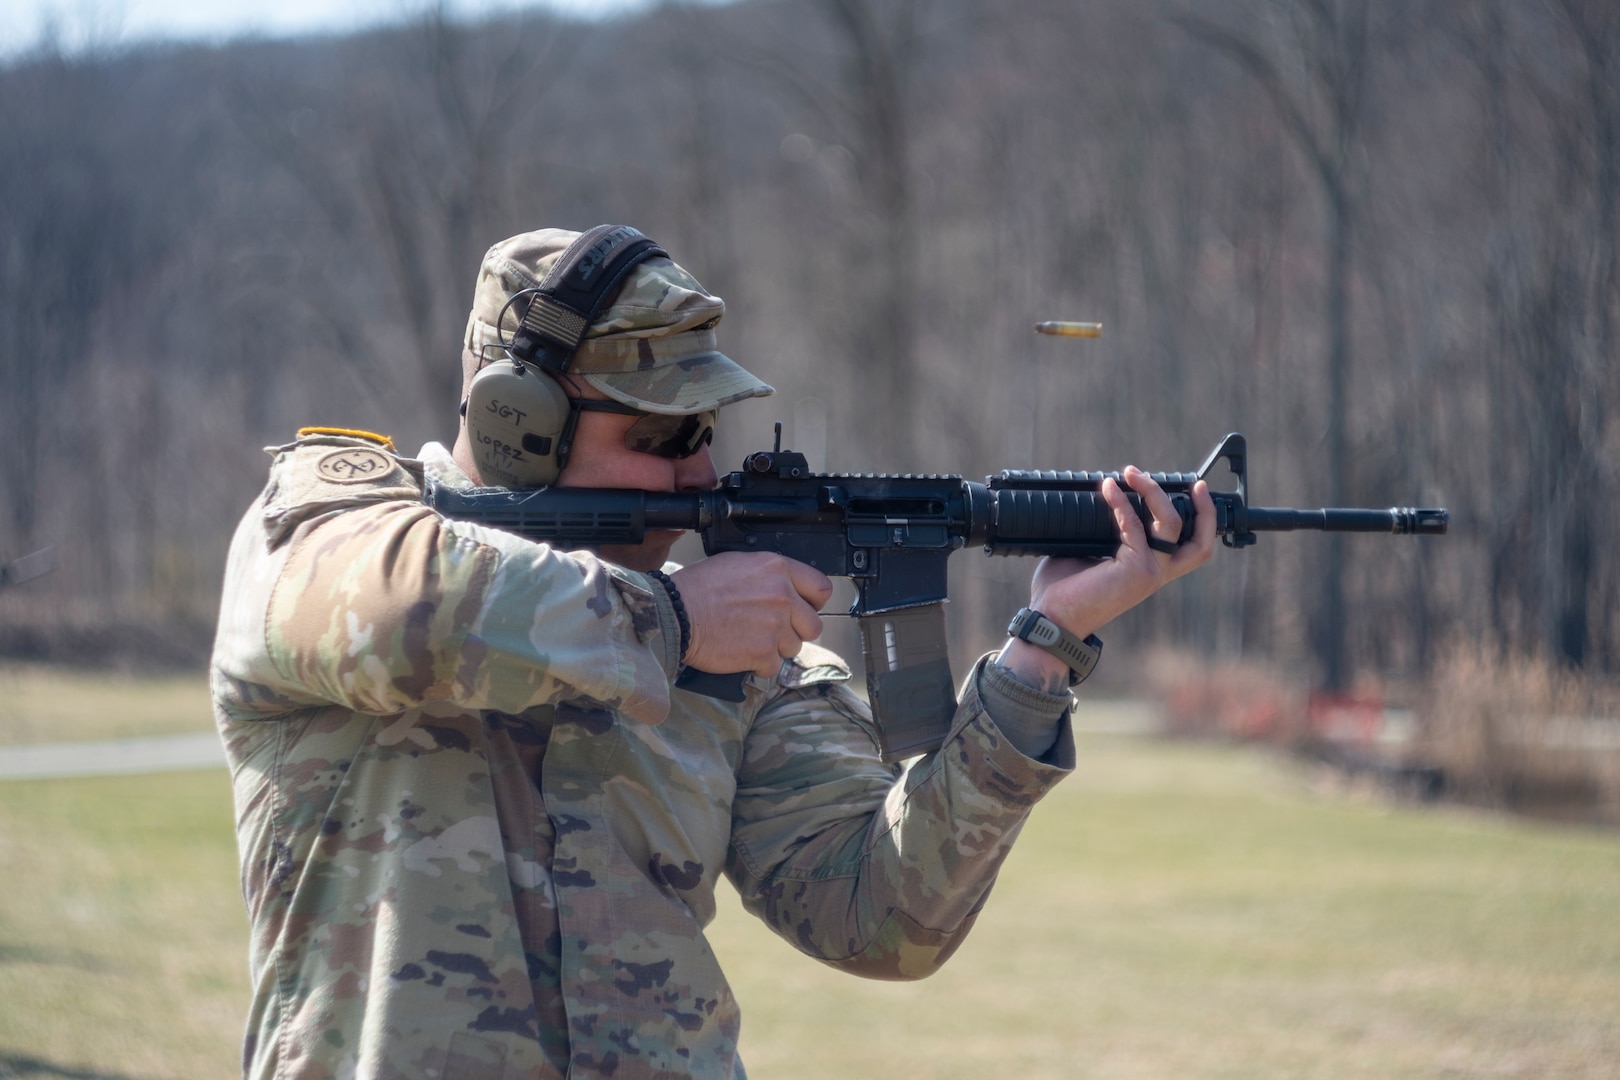 U.S. Army Sgt. Miguel Lopez, a team leader assigned to Alpha Company, 1st Battalion, 69th Infantry Regiment, fires an M4 carbine at Camp Smith Training Site in Peekskill, New York, during the 2024 Logan-Duffy Marksmanship Competition March 13, 2024. The competition, first held in 1936, is an annual shooting match between the 1st Battalion, 69th Infantry Regiment, and the 1st Battalion, 182nd Infantry Regiment.